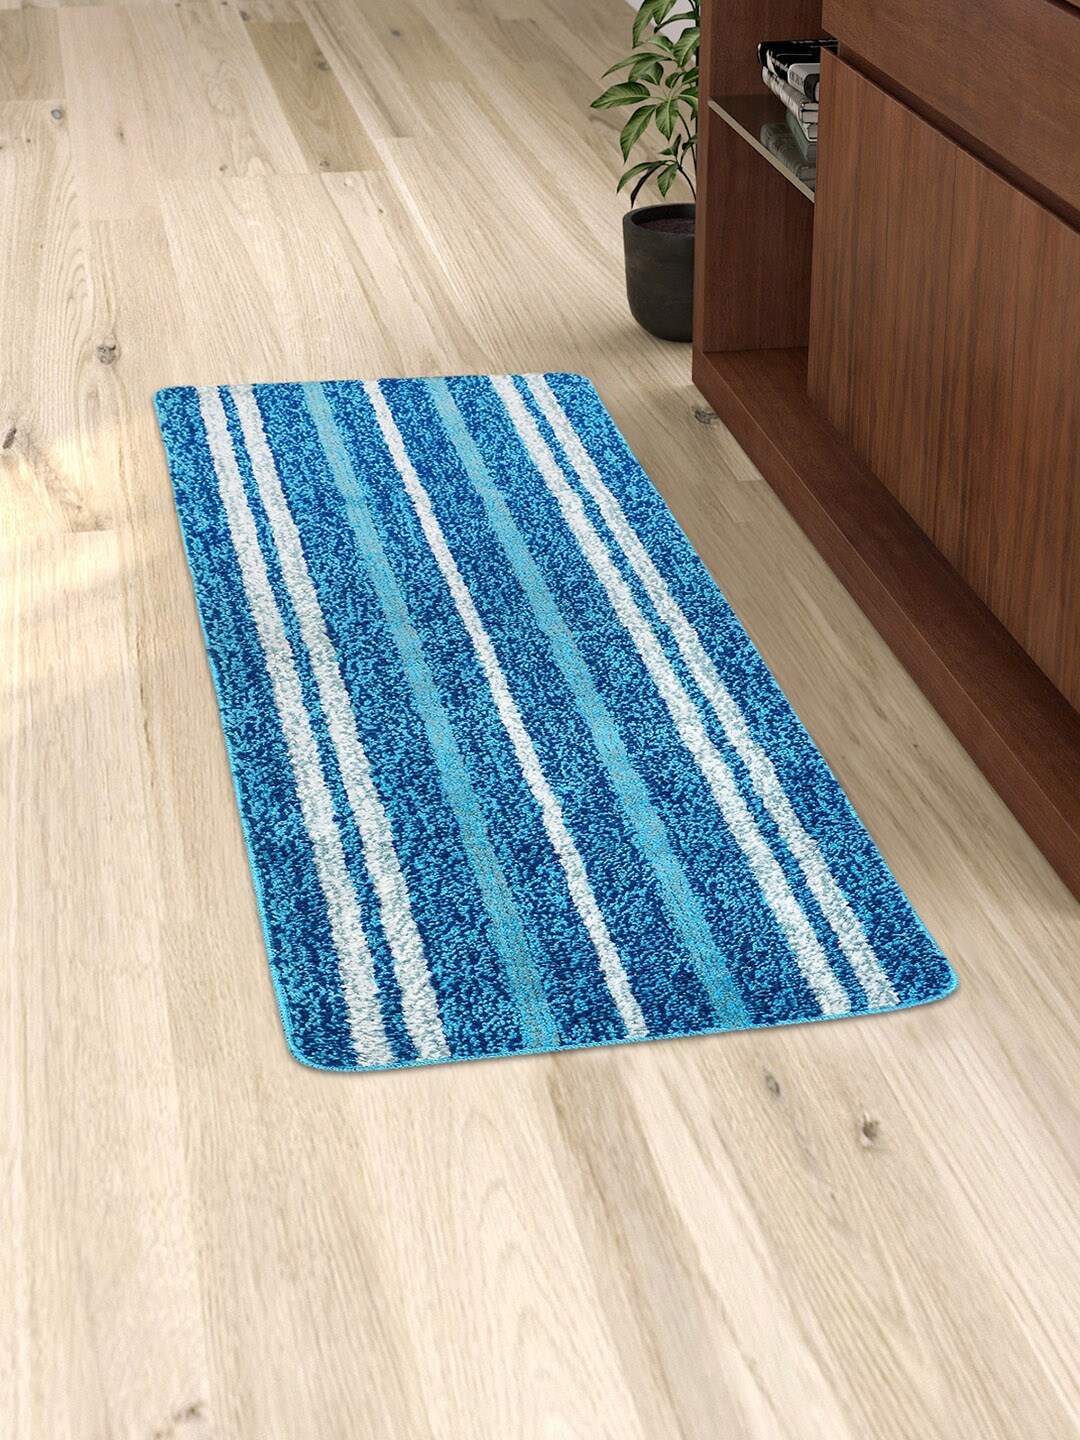 Saral Home Blue & White Striped Anti-Skid Floor Runner Price in India